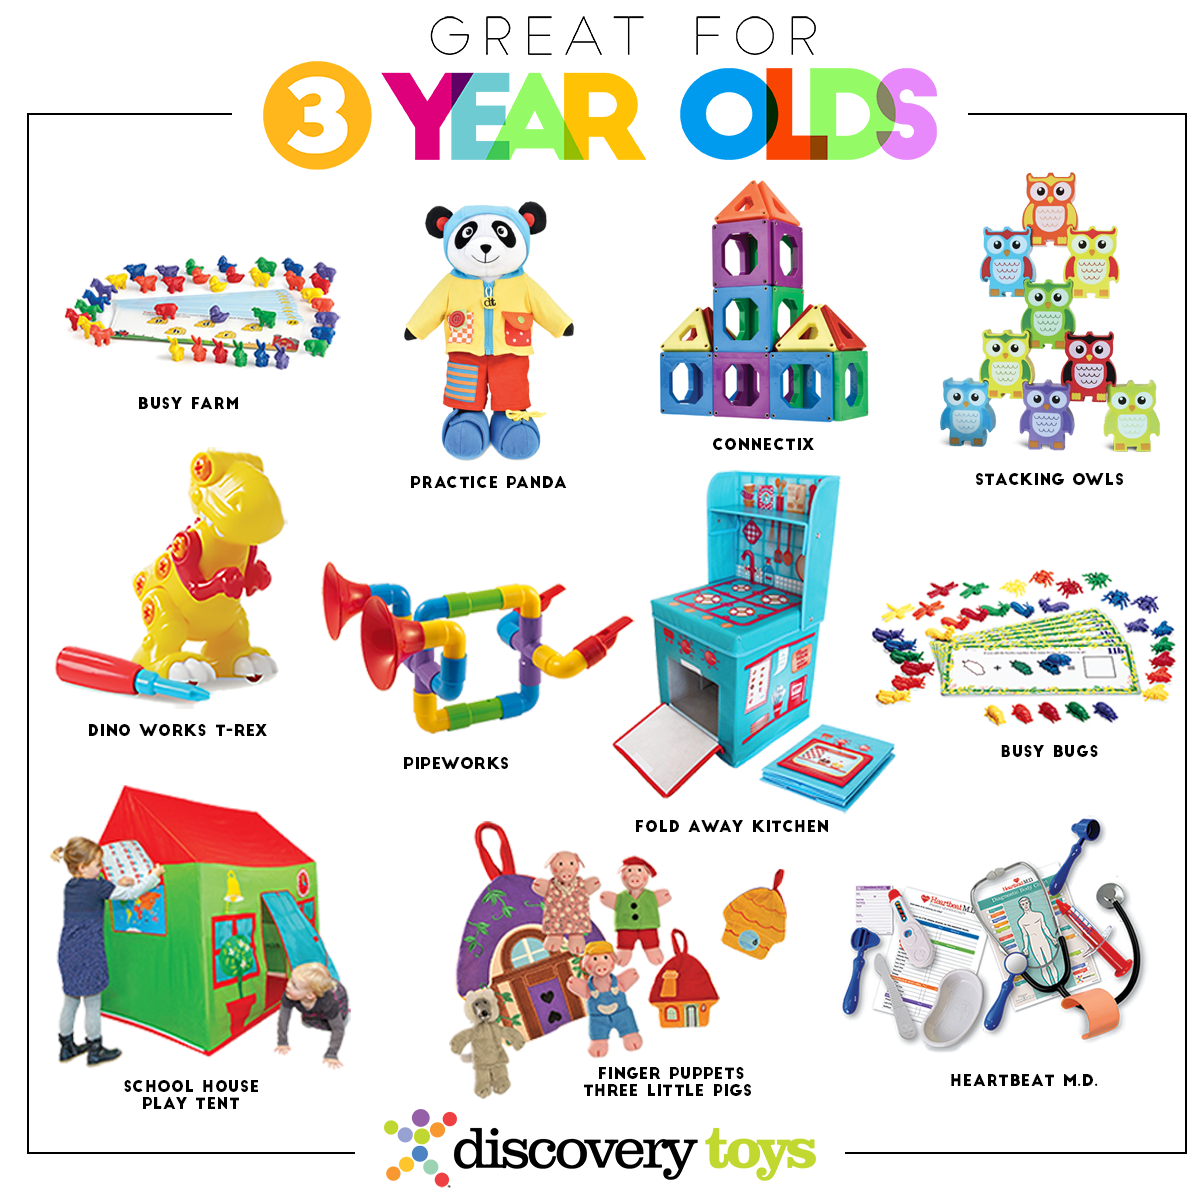 2018 toys for 3 year olds